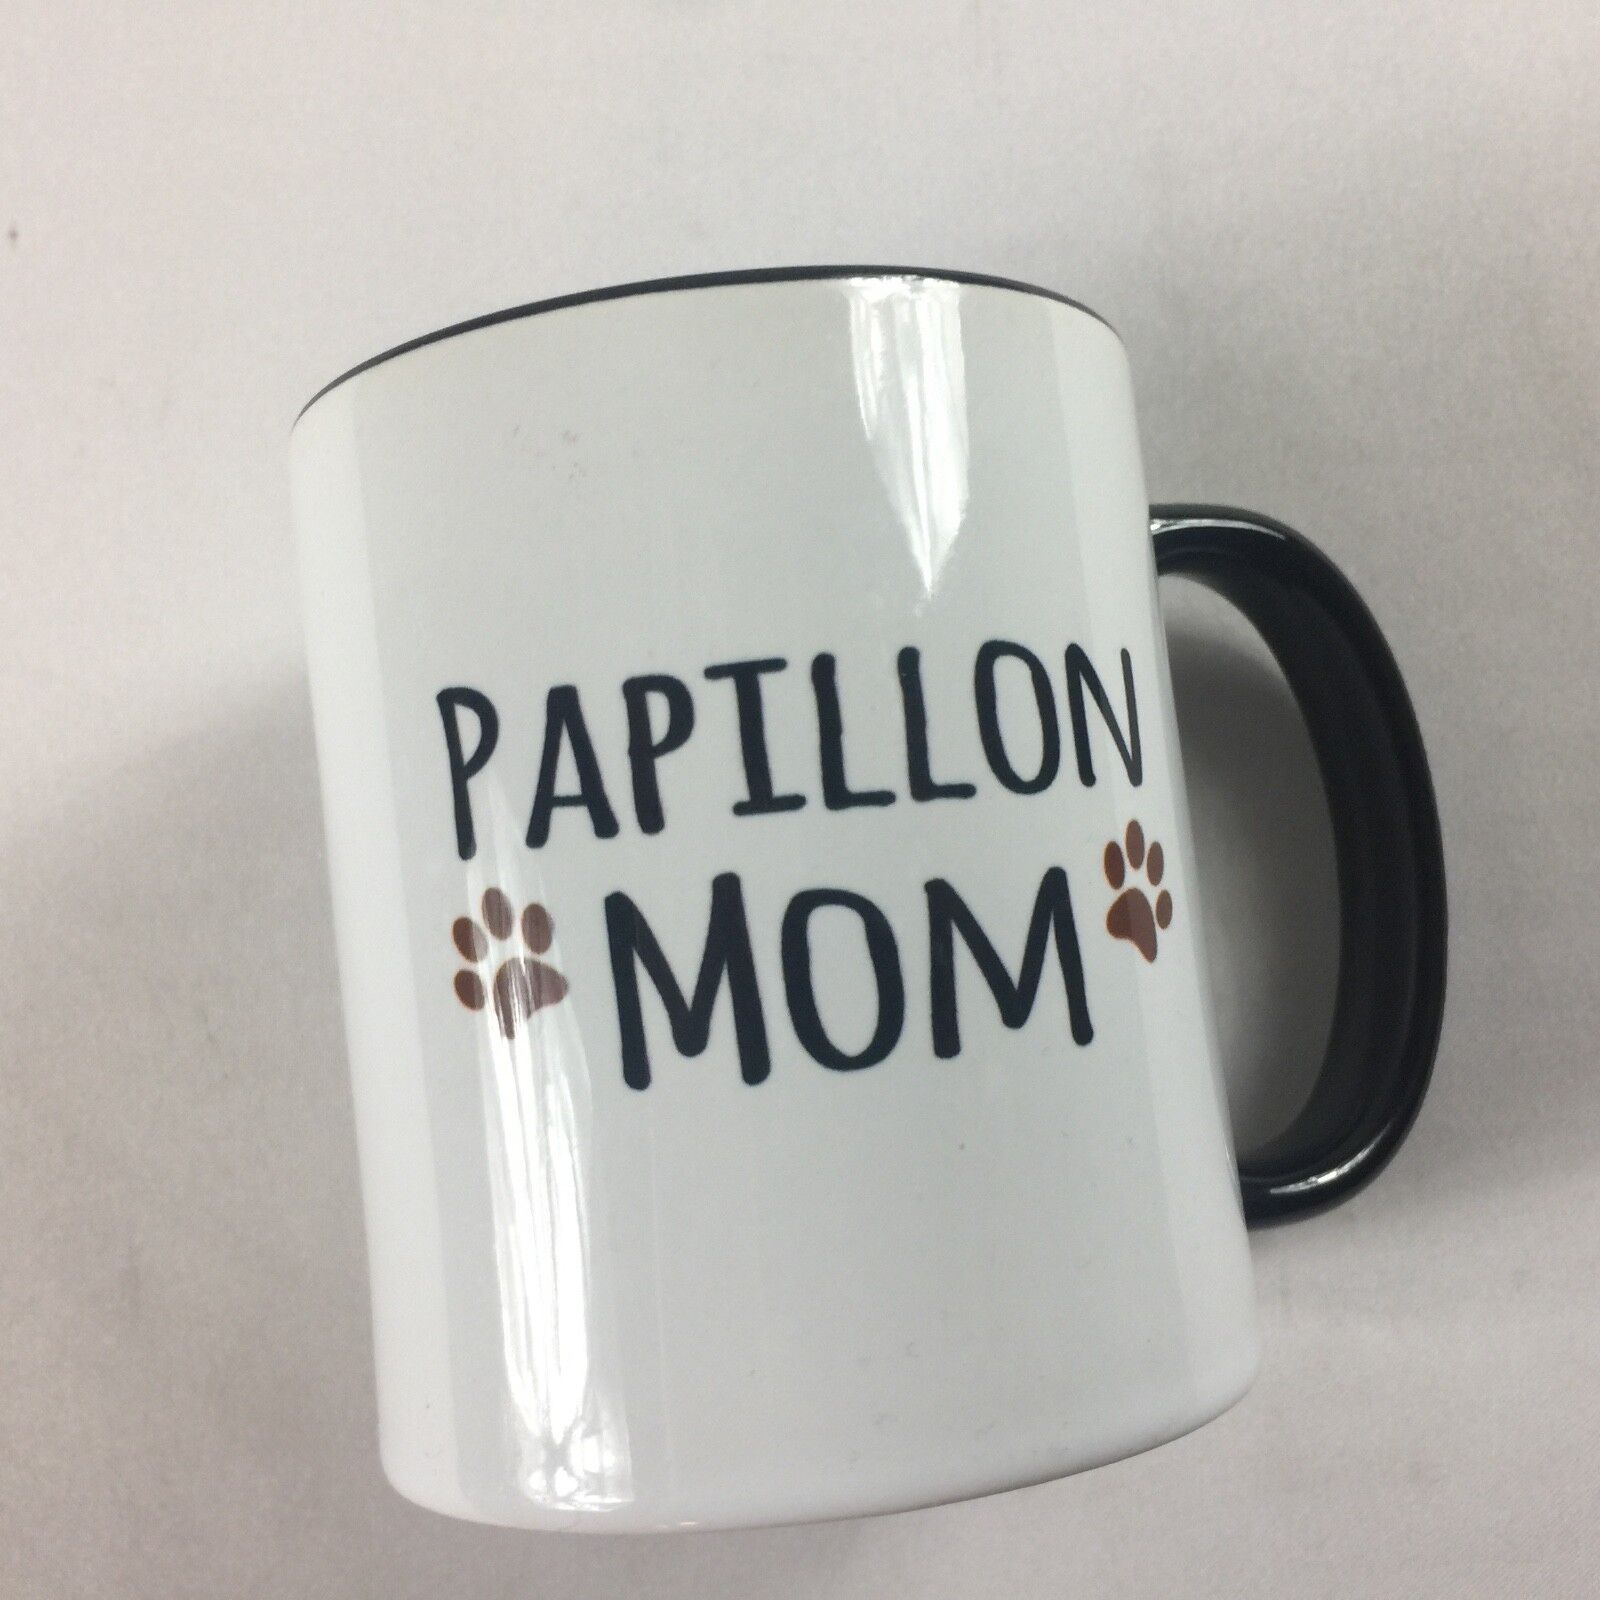 Papillon Mom Coffee Mug Cup Tea Drink Dog Lover Mother Puppy Animal Lover Gift